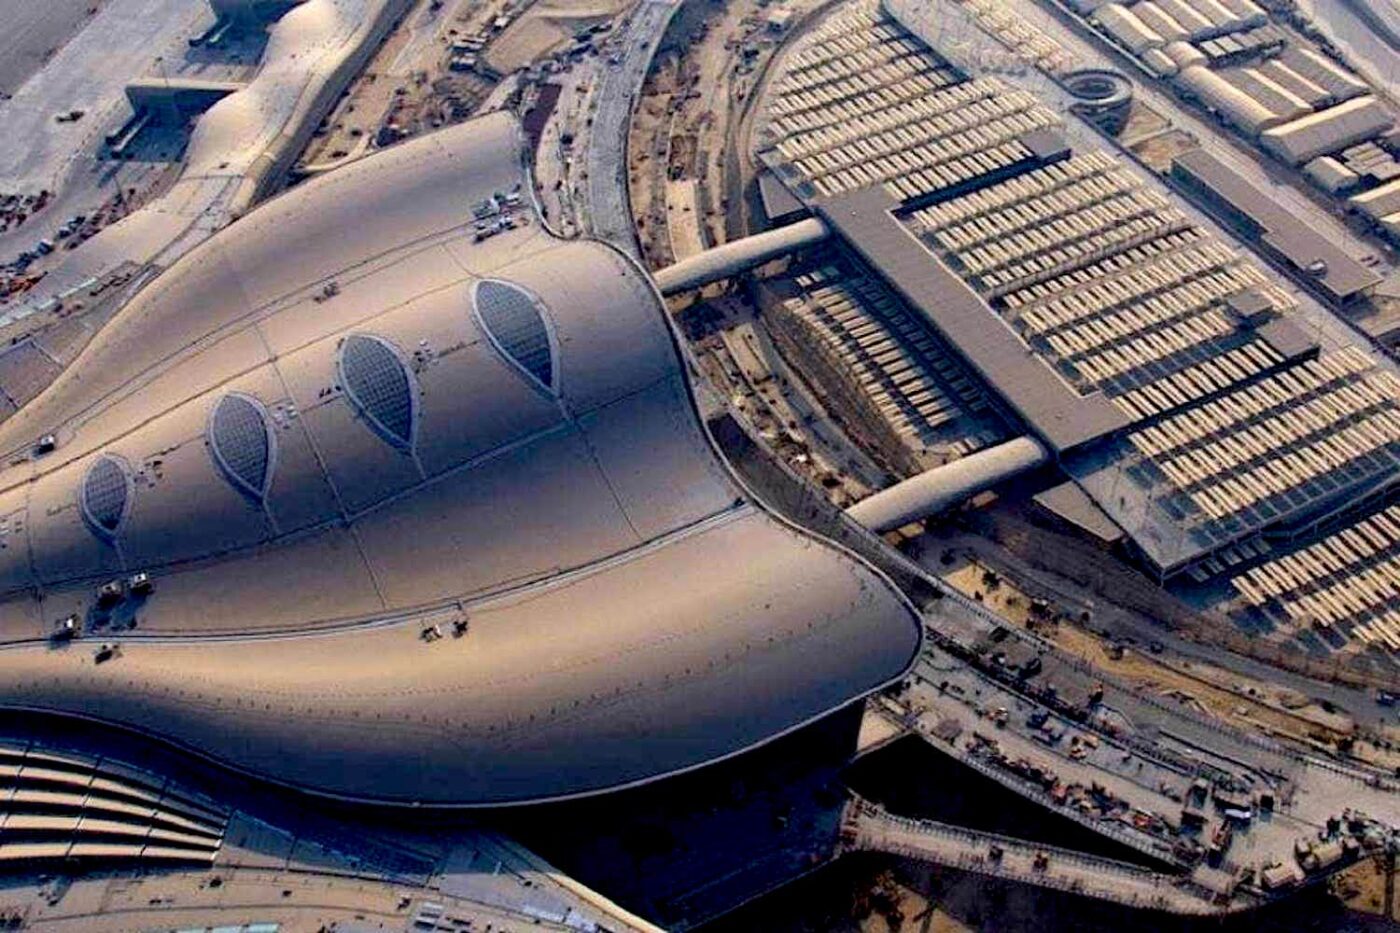 UAE’s $5 Billion ‘Mission Impossible’ Airport Set To Open In November